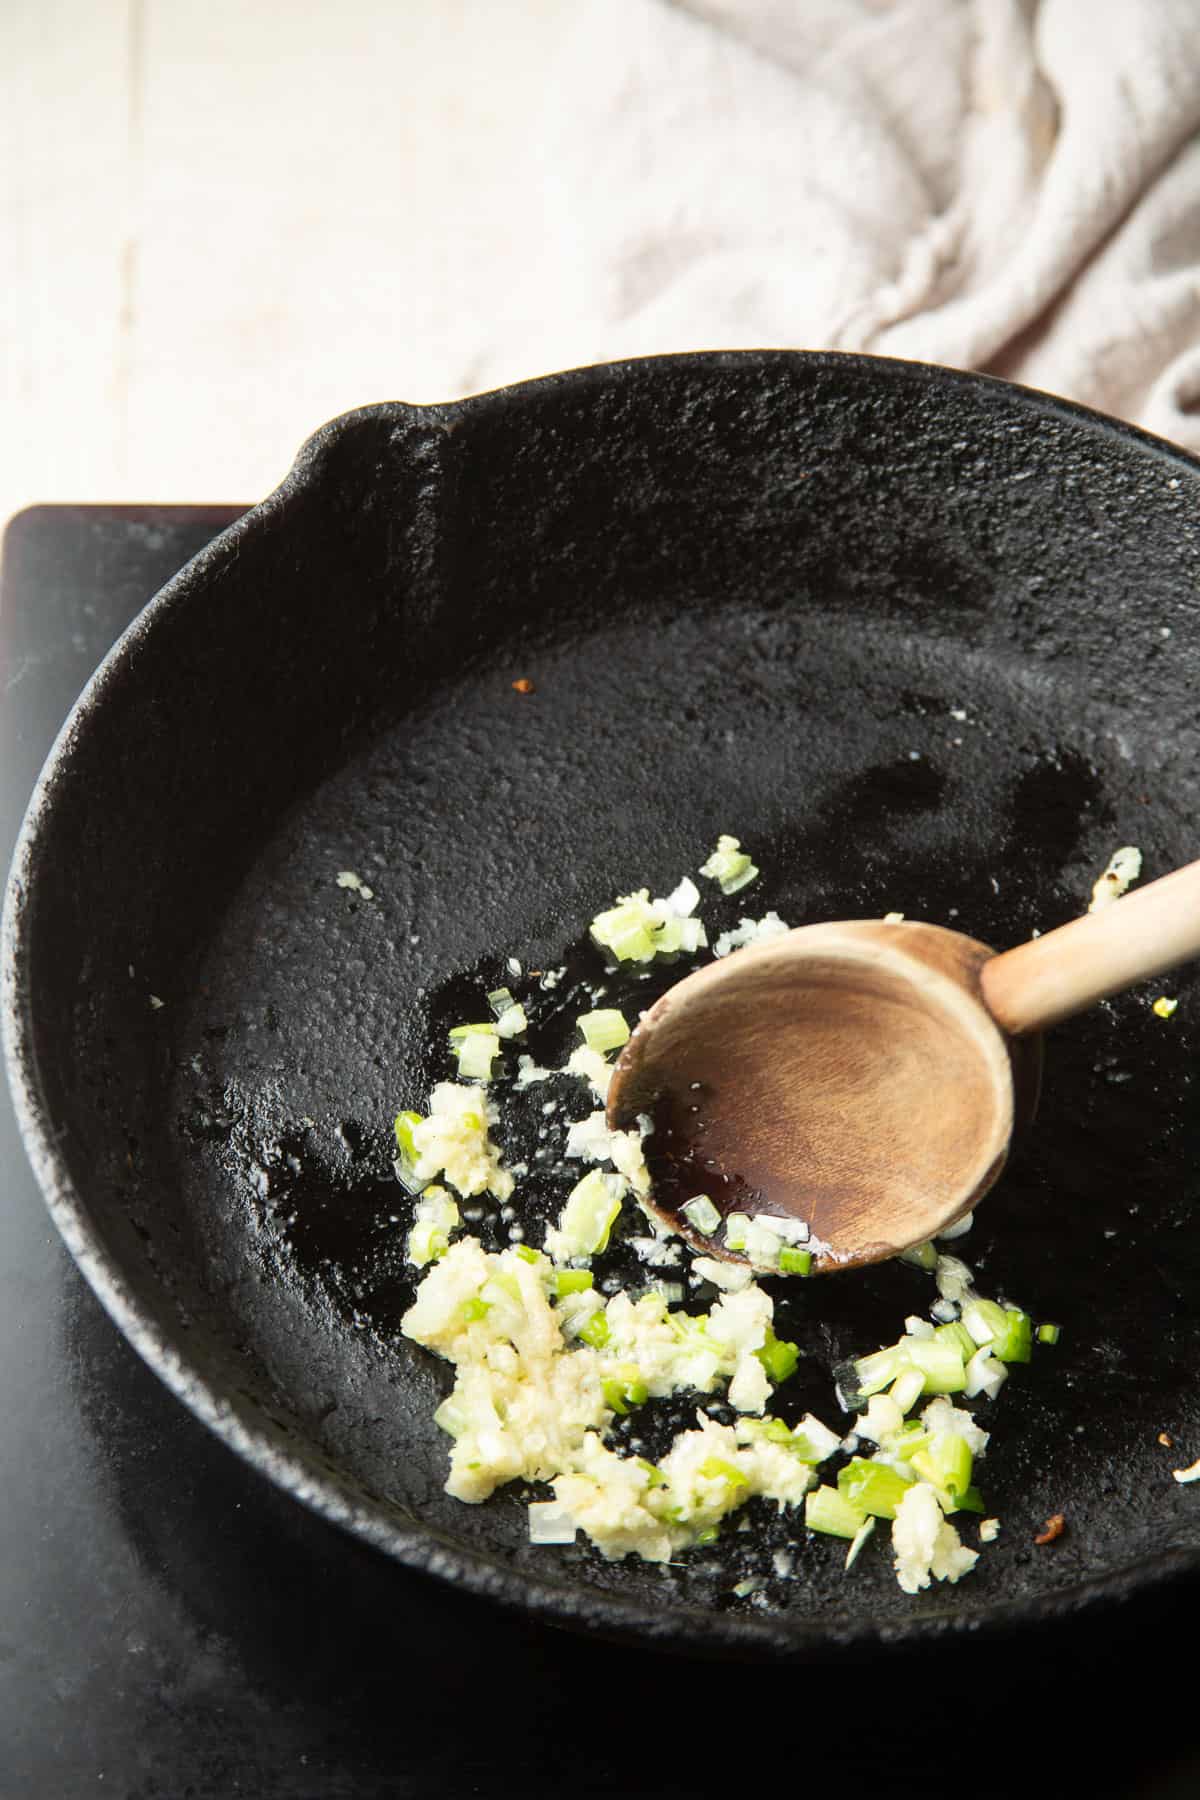 Cook garlic, ginger and scallions in a pan.